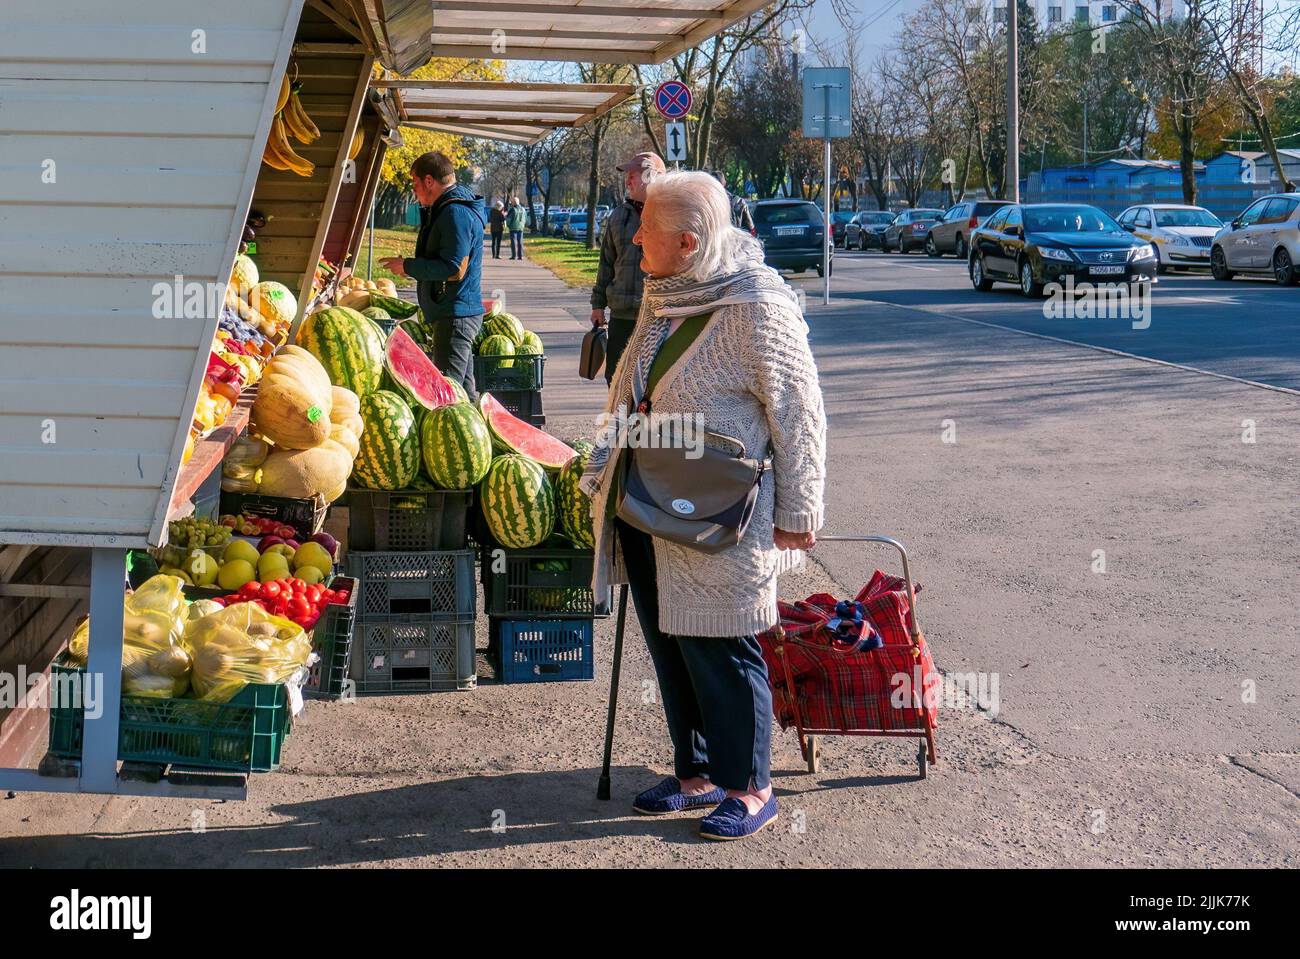 Minsk, Belarus - October 09, 2018: A very old woman looks at the fruit stalls. The concept of financial difficulties in old age Stock Photo